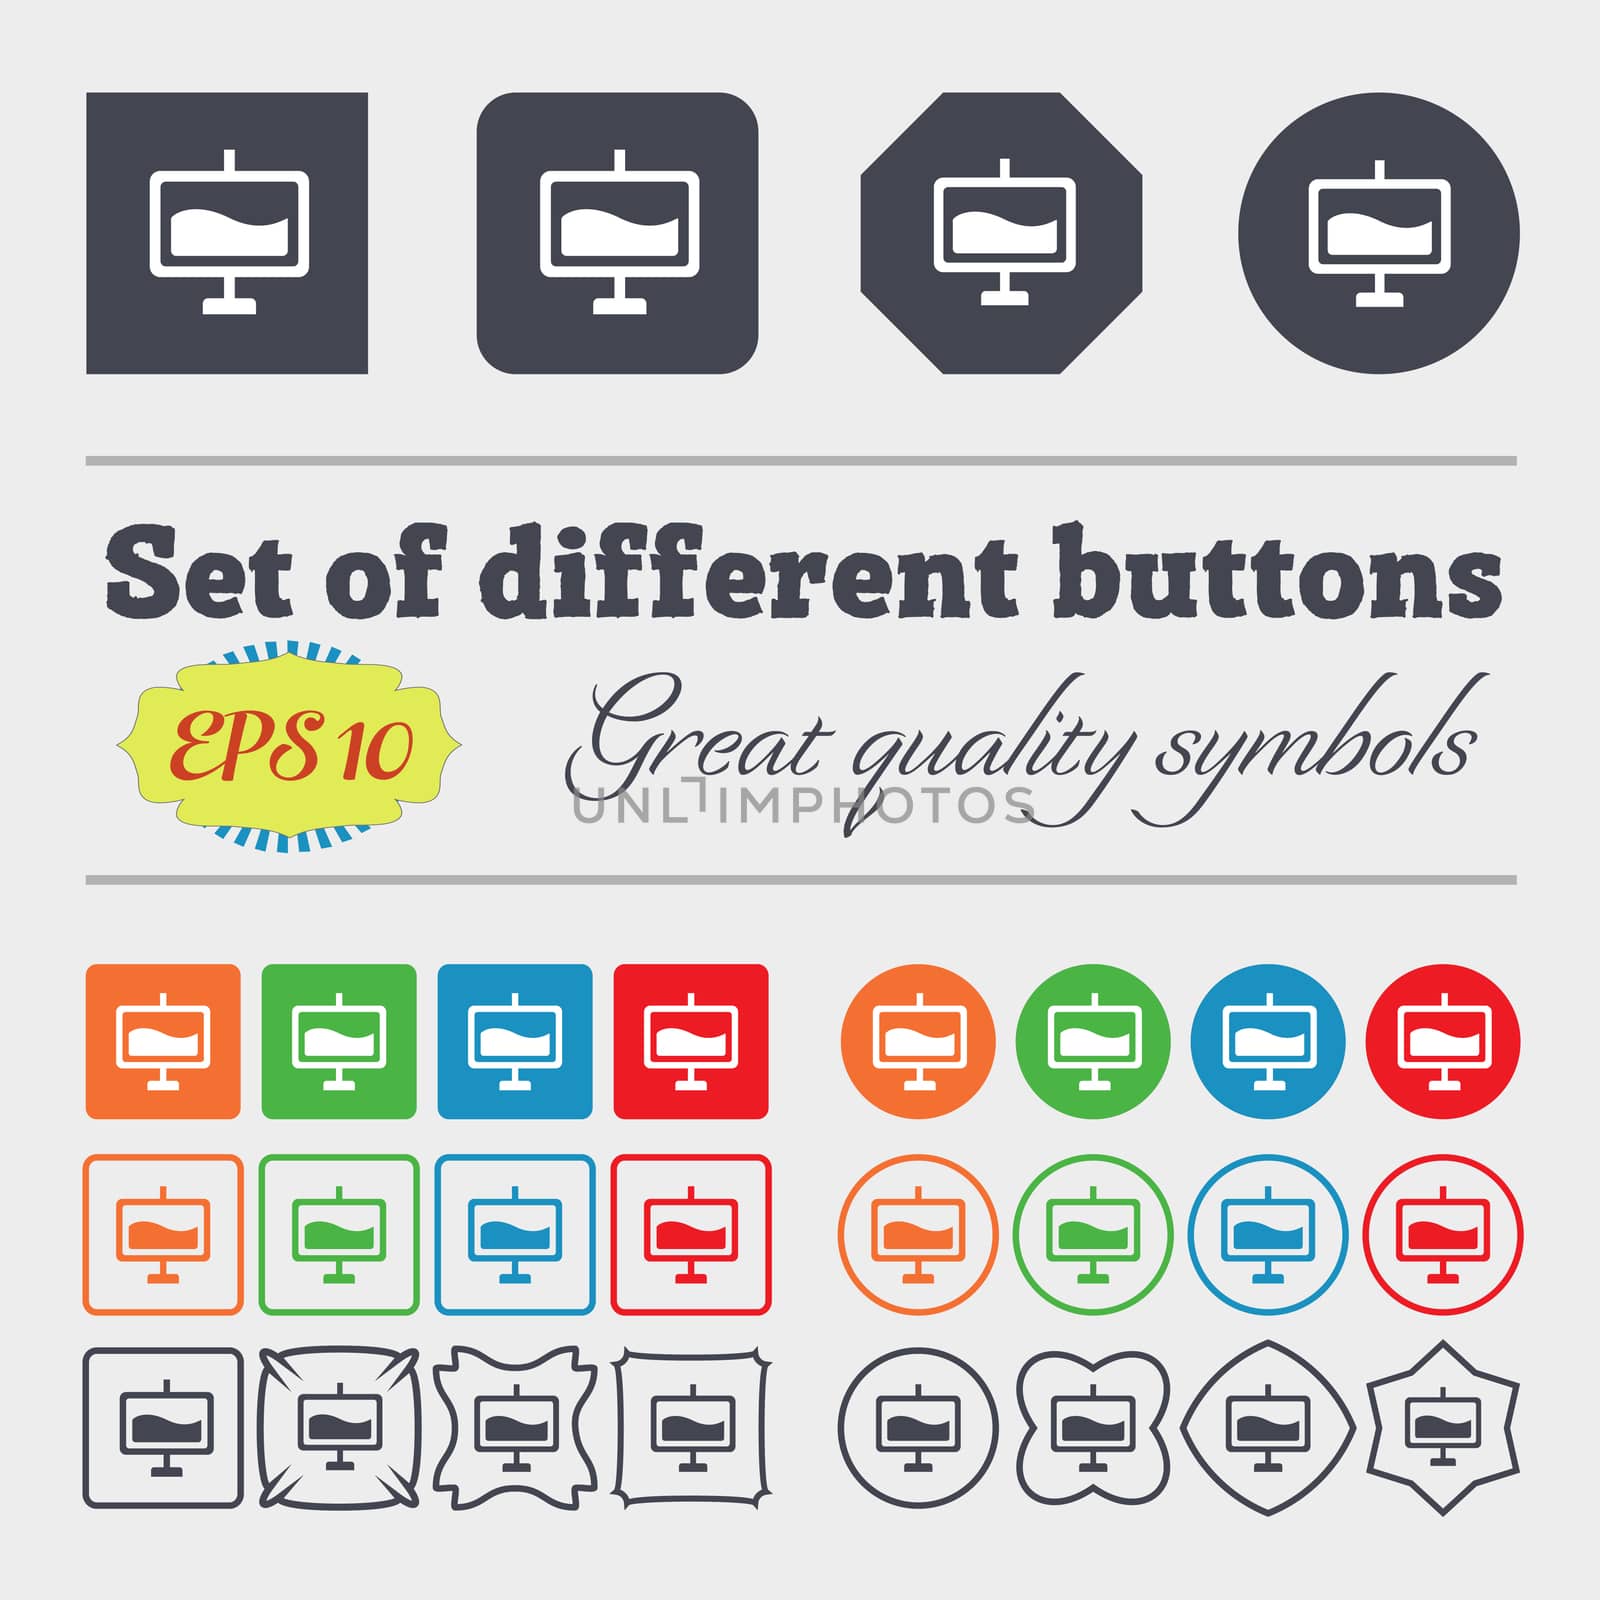 Presentation billboard icon sign Big set of colorful, diverse, high-quality buttons. illustration